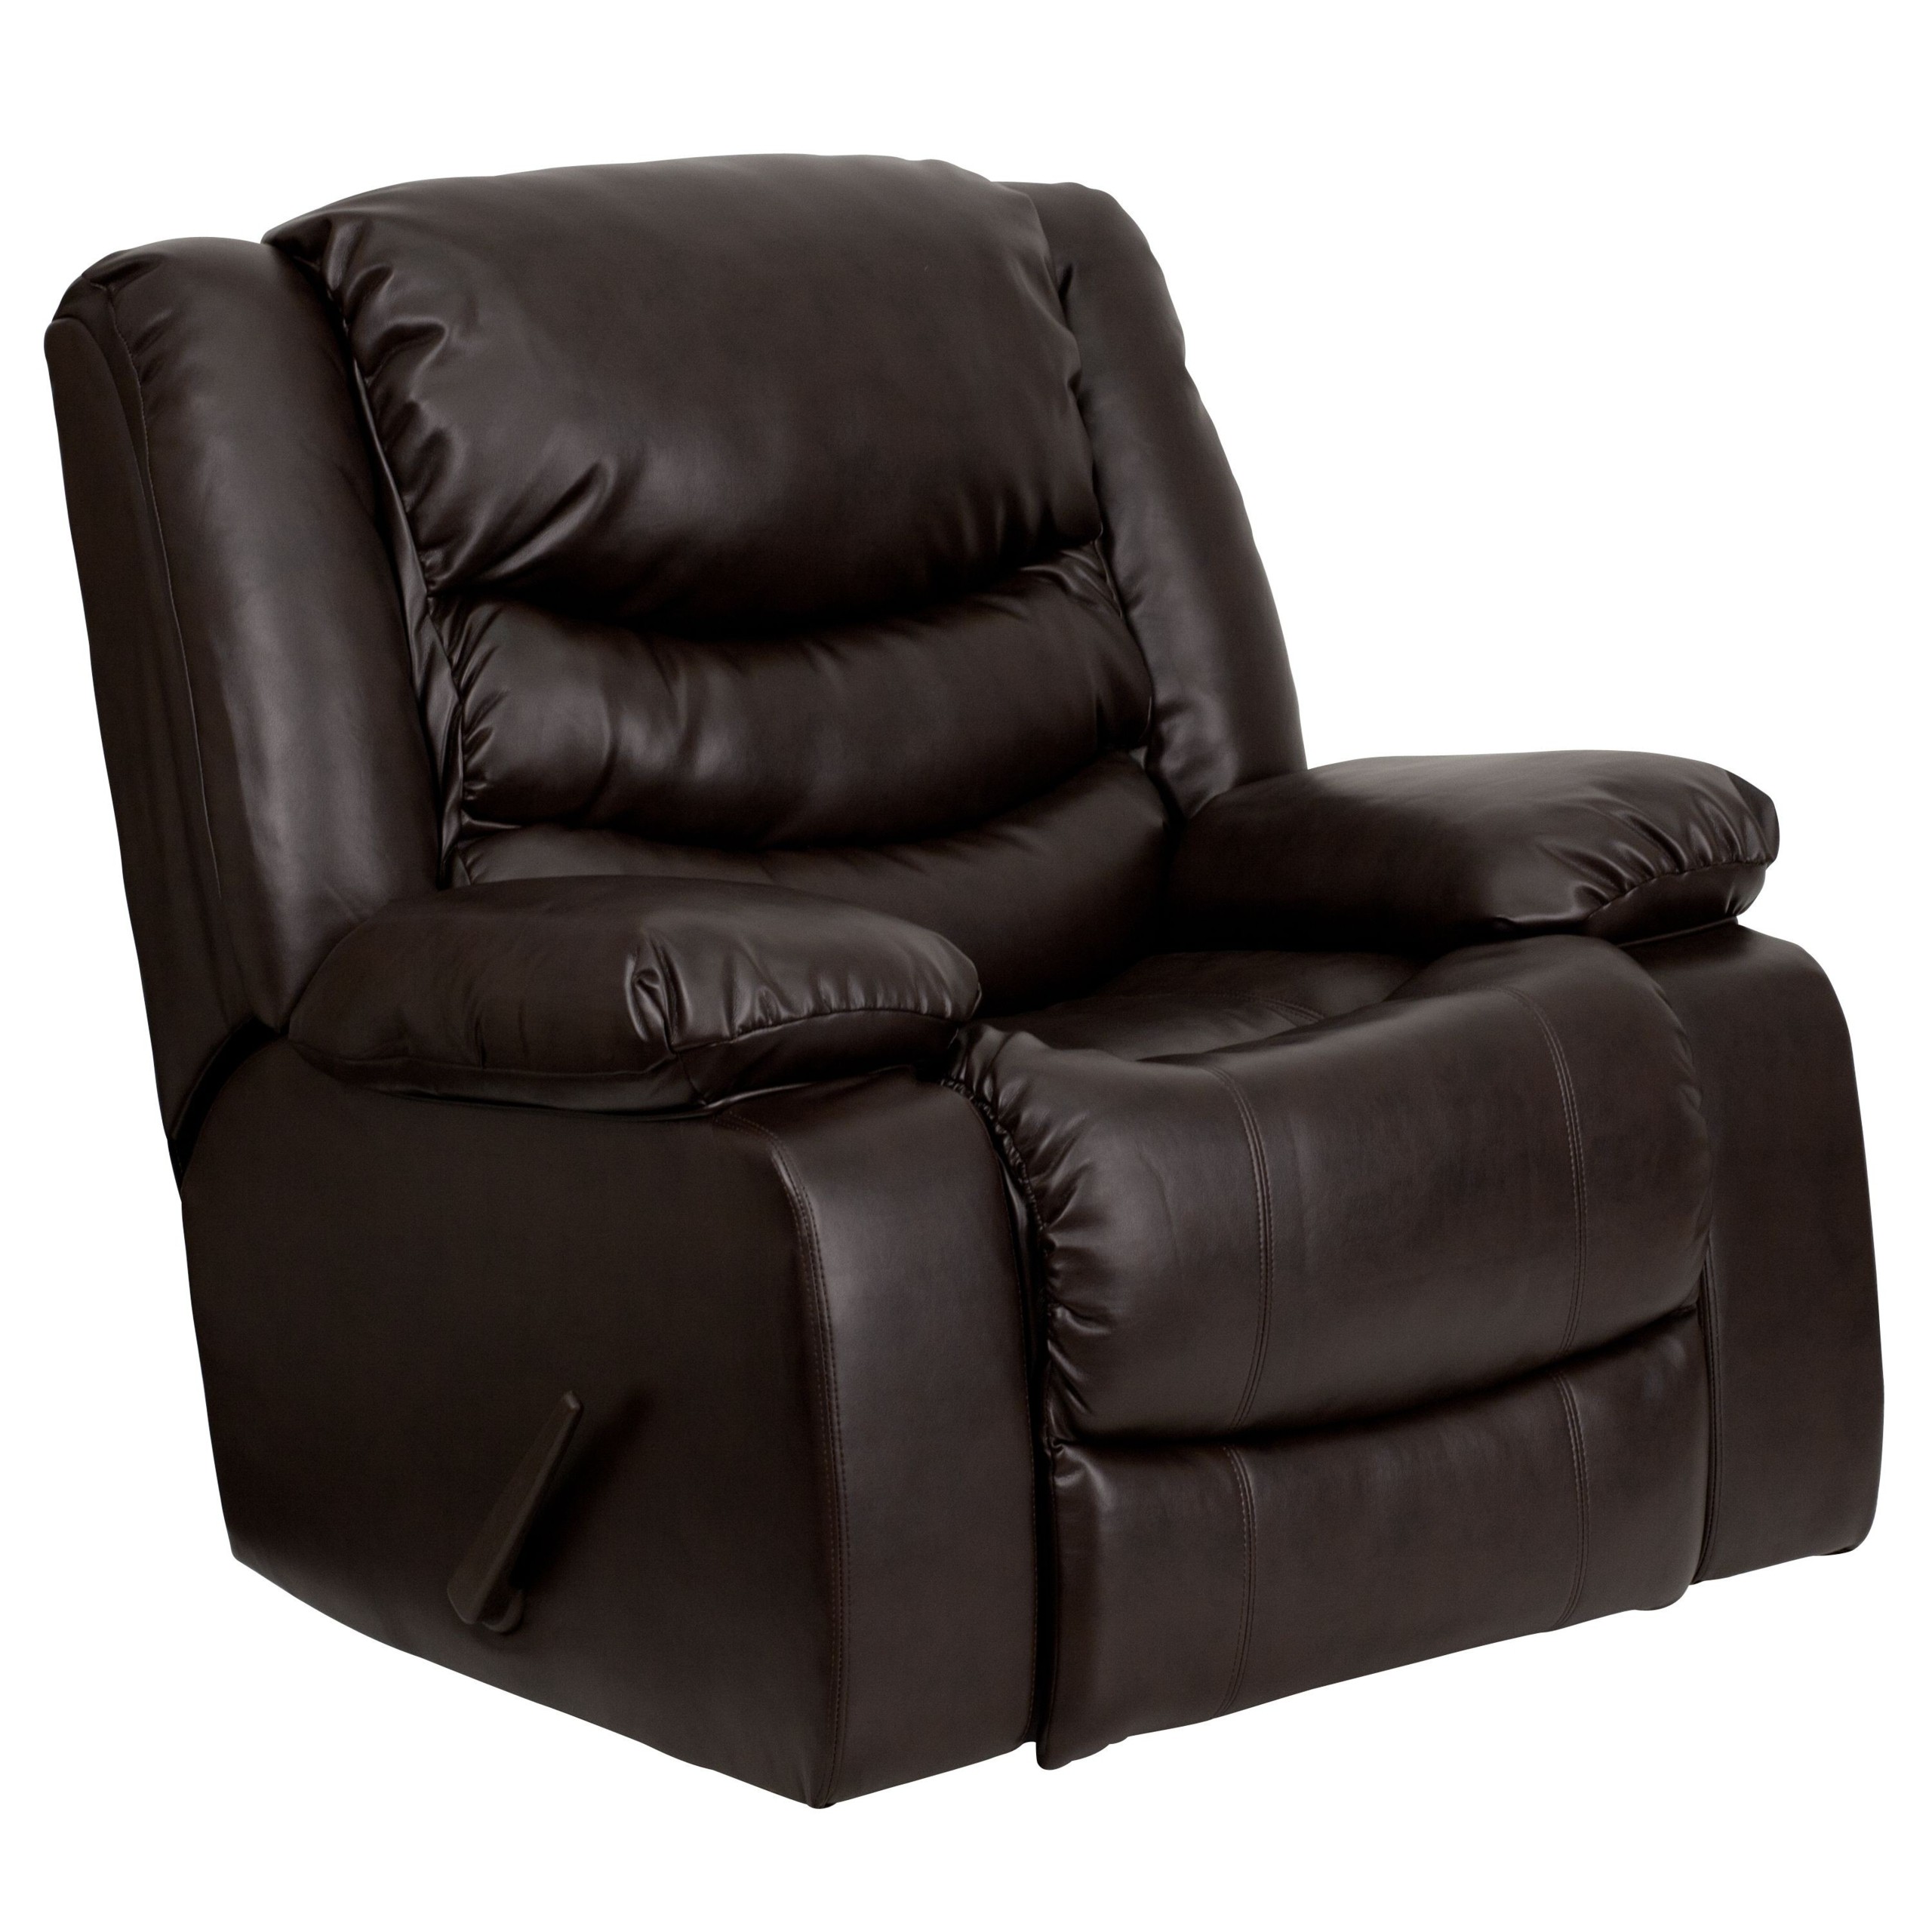 Oversized Swivel Rocker Recliner : Best Oversized Recliners For Big And